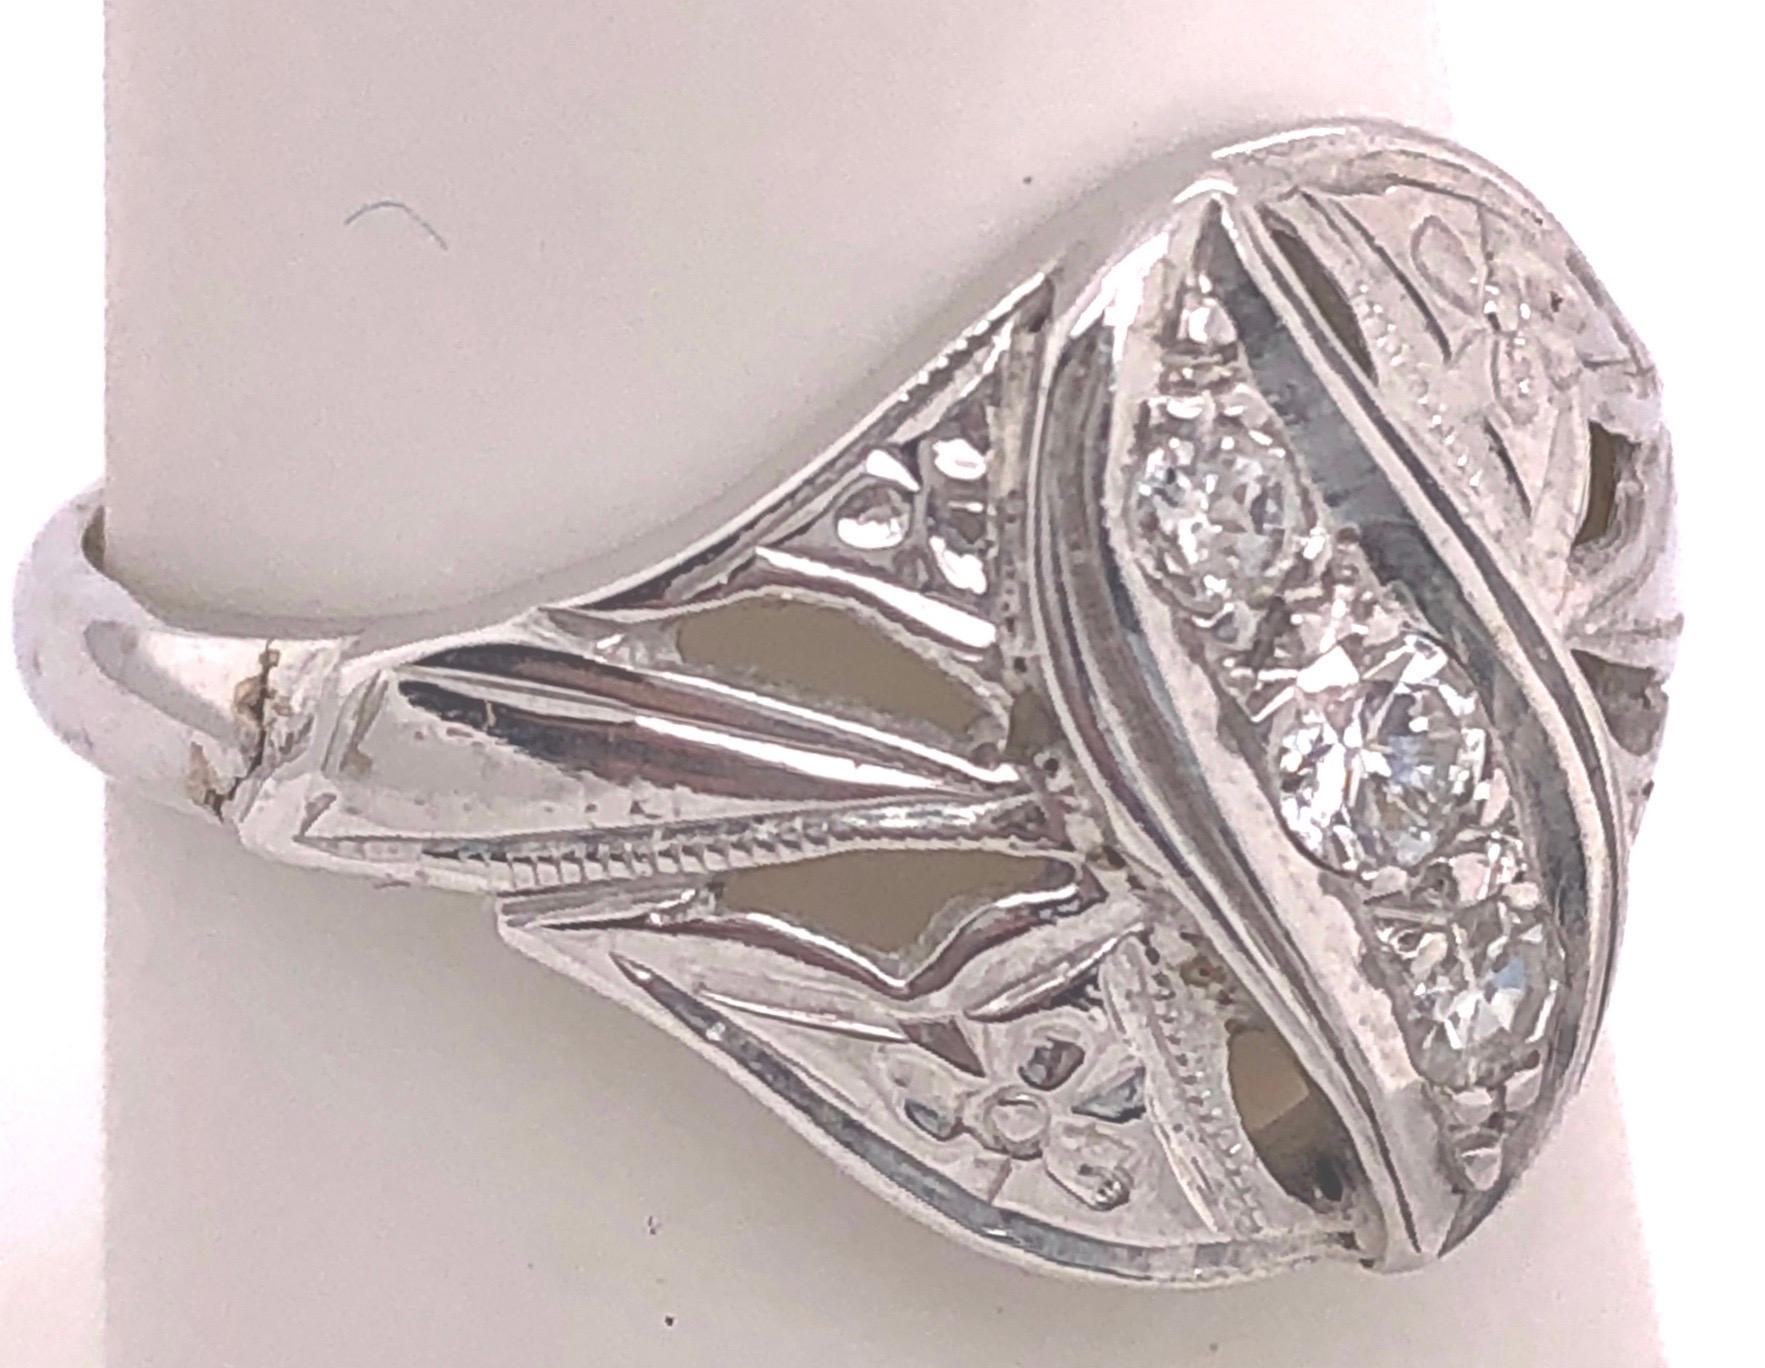 14 Karat White Gold Contemporary Ring with Three Round Diamonds Size 5.75.
0.25 total diamond weight.
2.85 grams total weight.